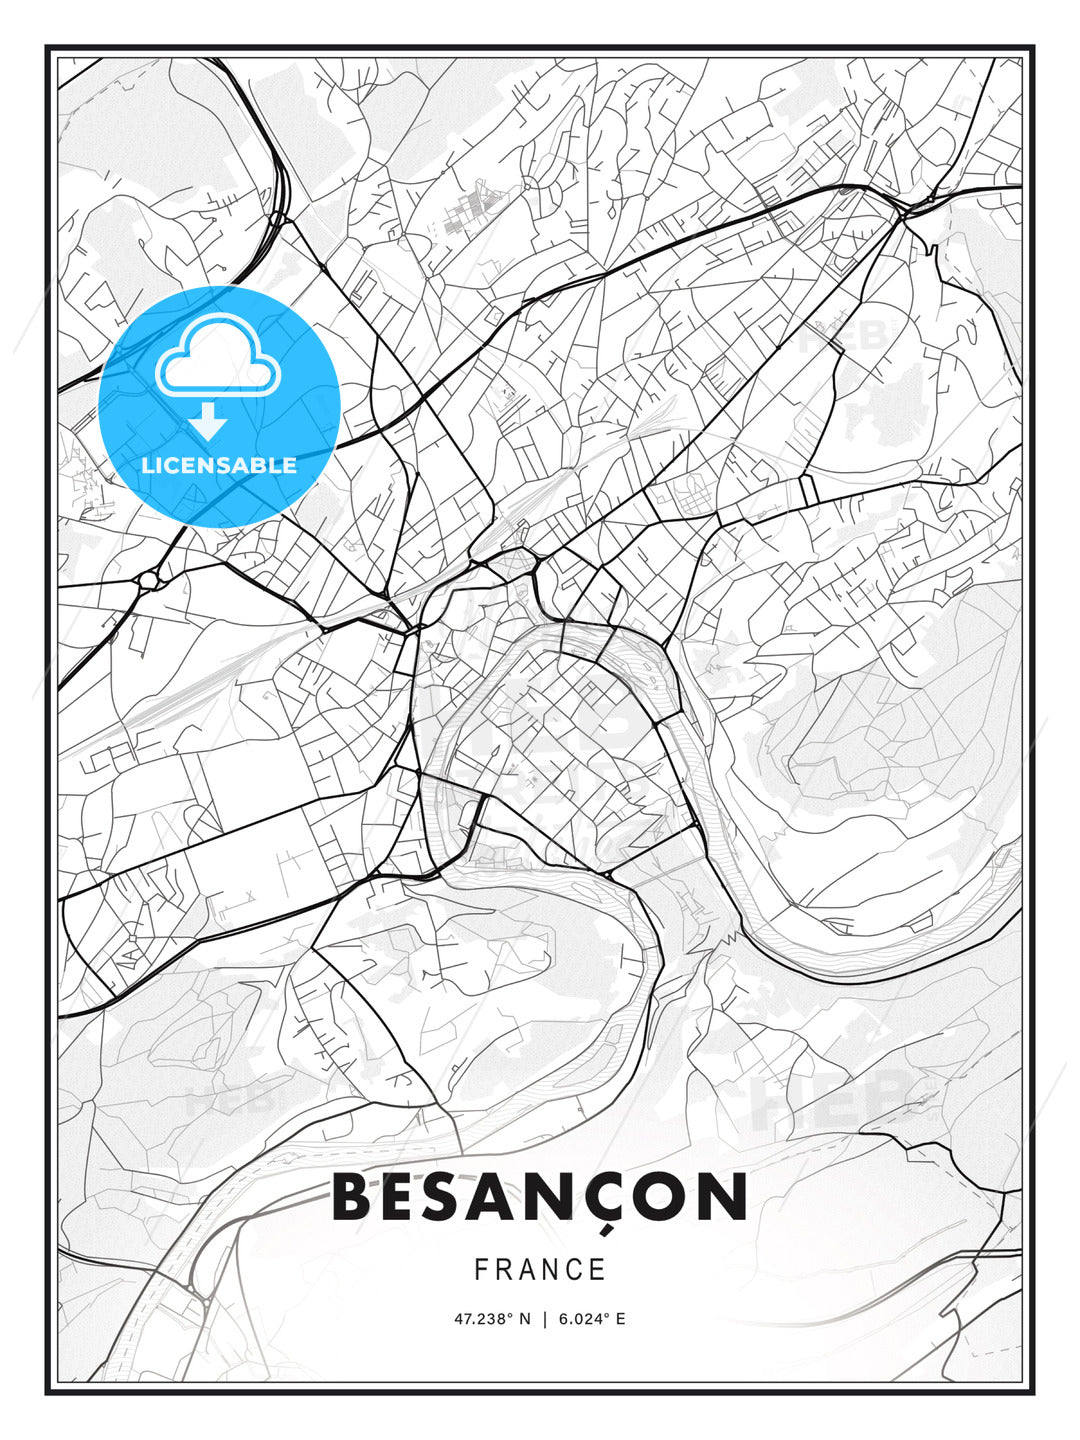 Besançon, France, Modern Print Template in Various Formats - HEBSTREITS Sketches